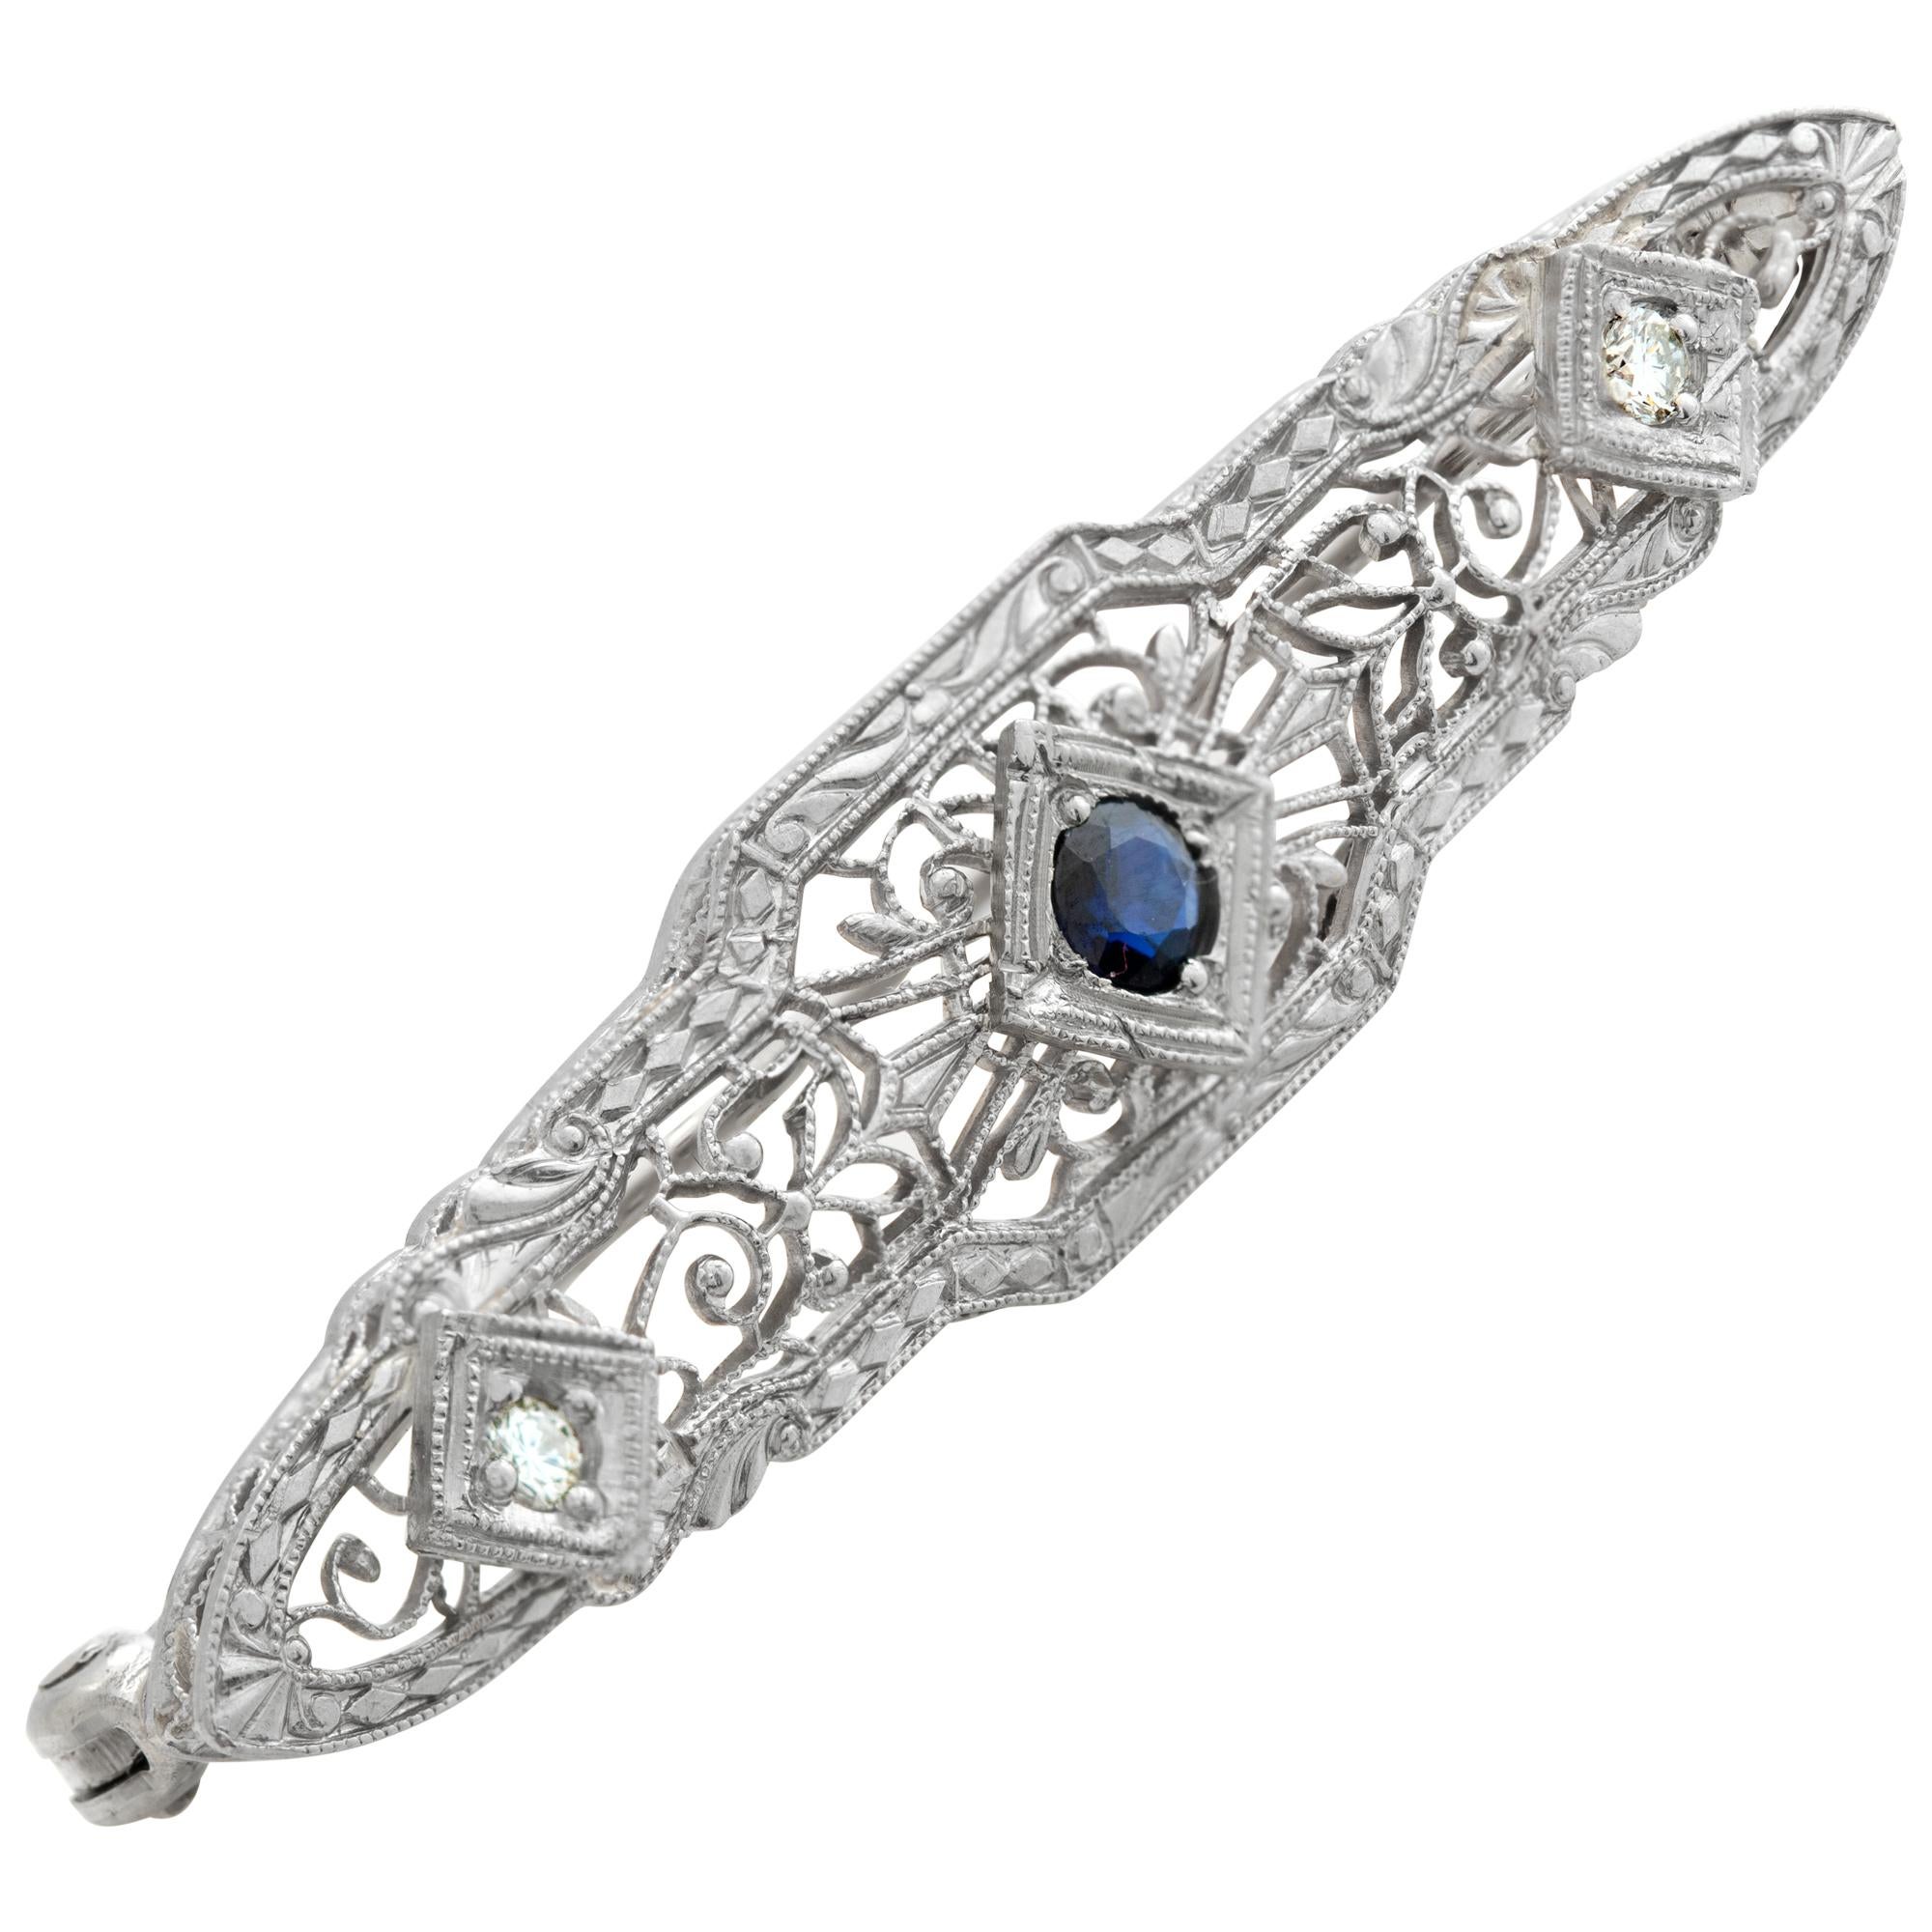 Edwardian pin in 14k white gold with center sapphire and 2 side accent diamonds. 1.75 inches in length. Width 9.5mm.
